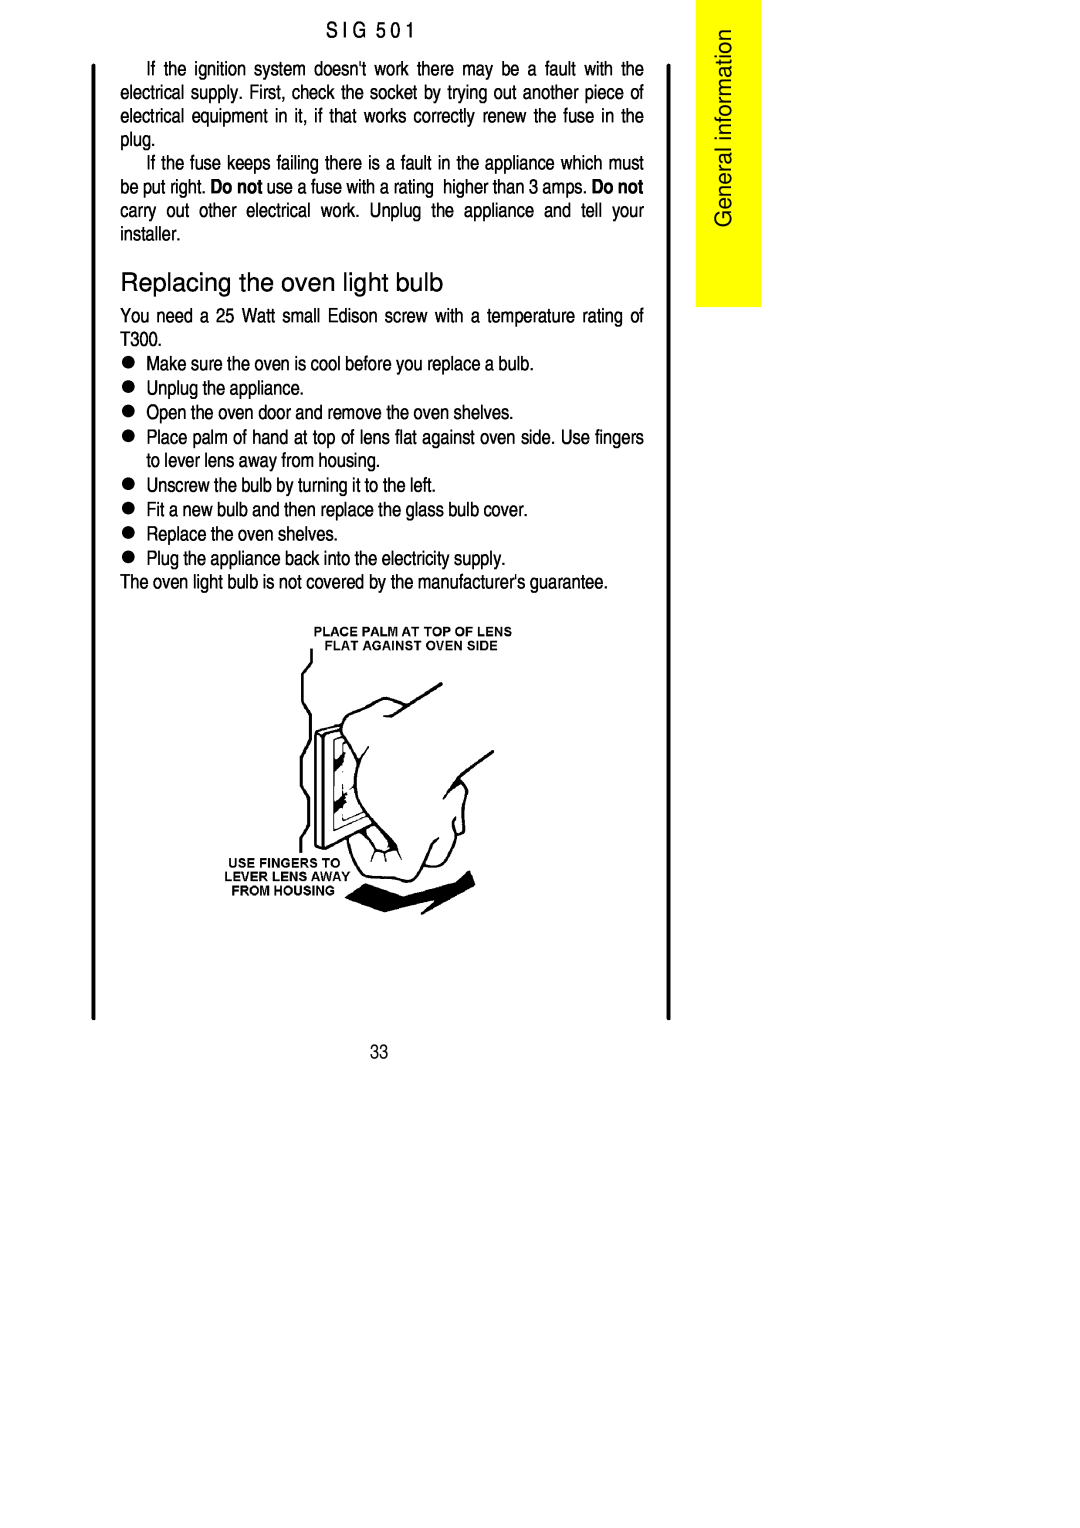 Electrolux SIG 501 installation instructions Replacing the oven light bulb, General information, S I G 